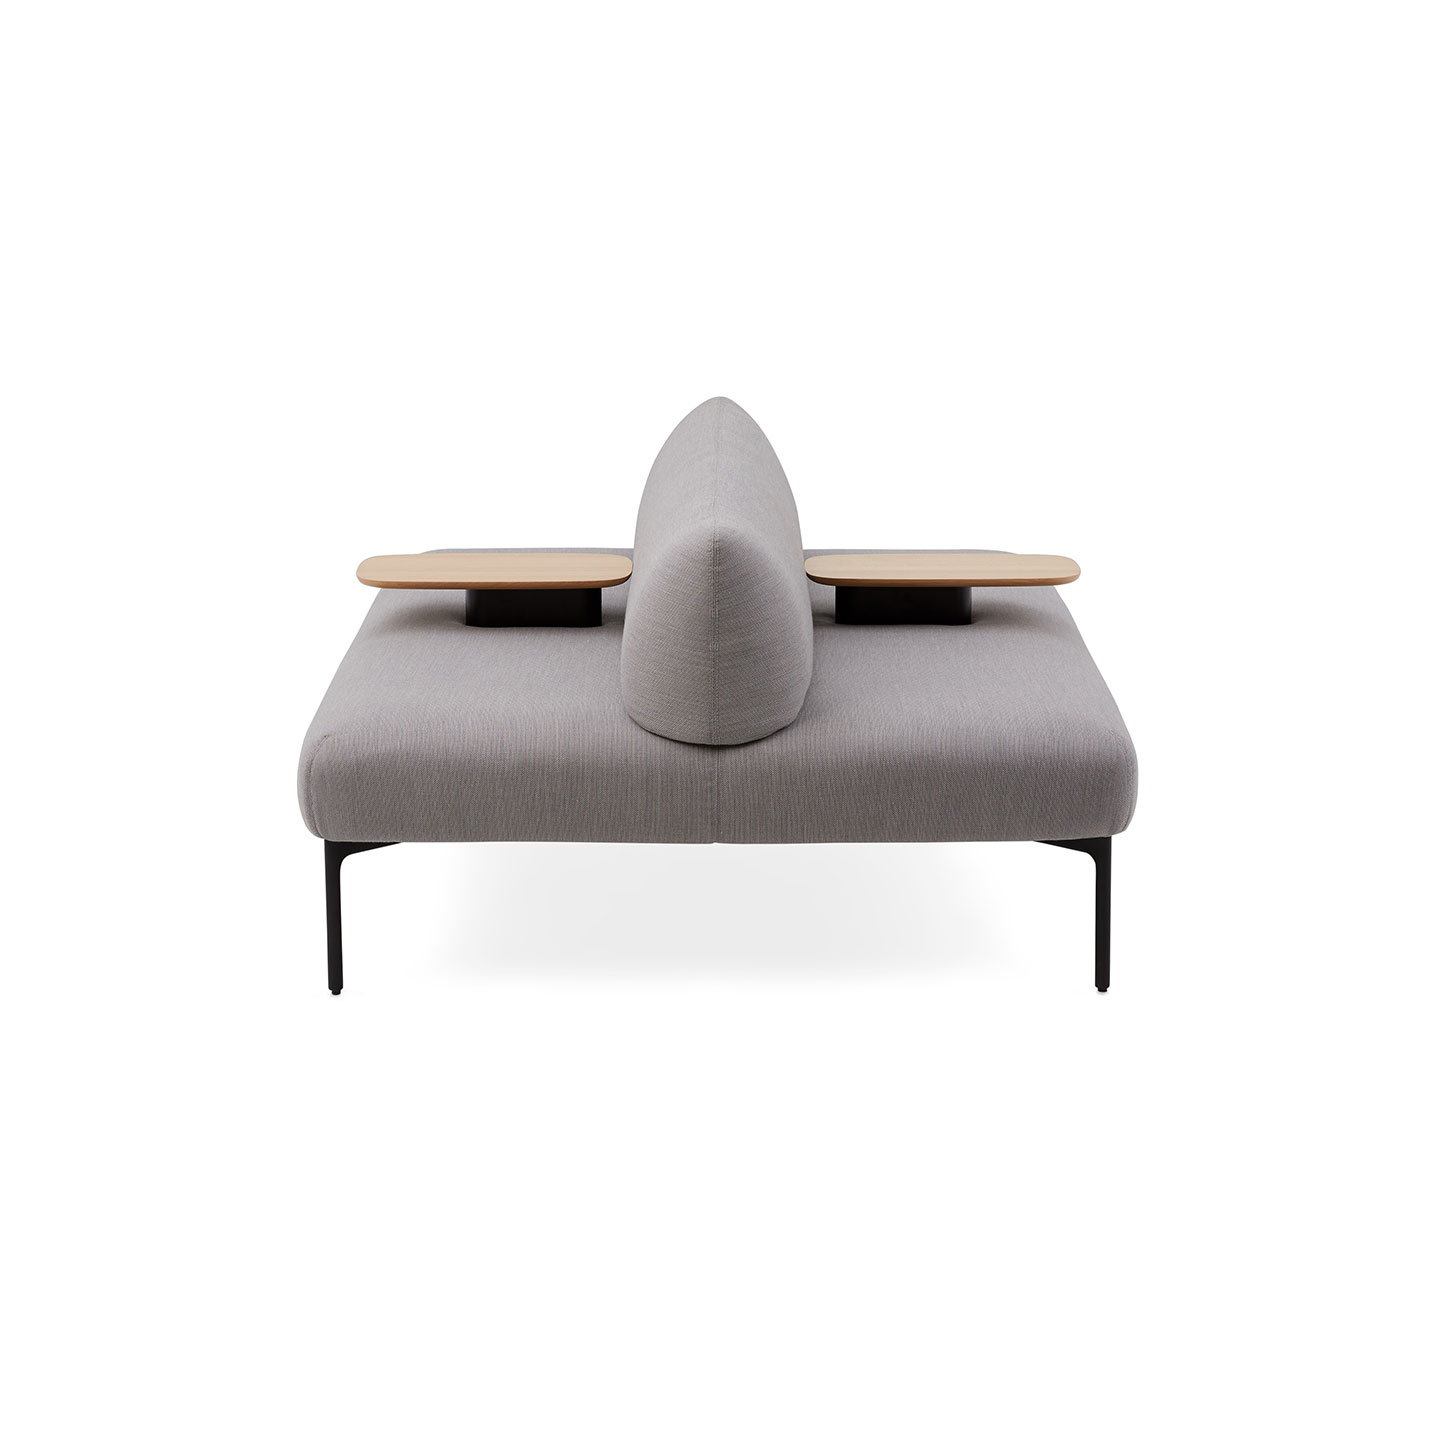 Haworth Cabana lounge island in grey color with integrated table side view 